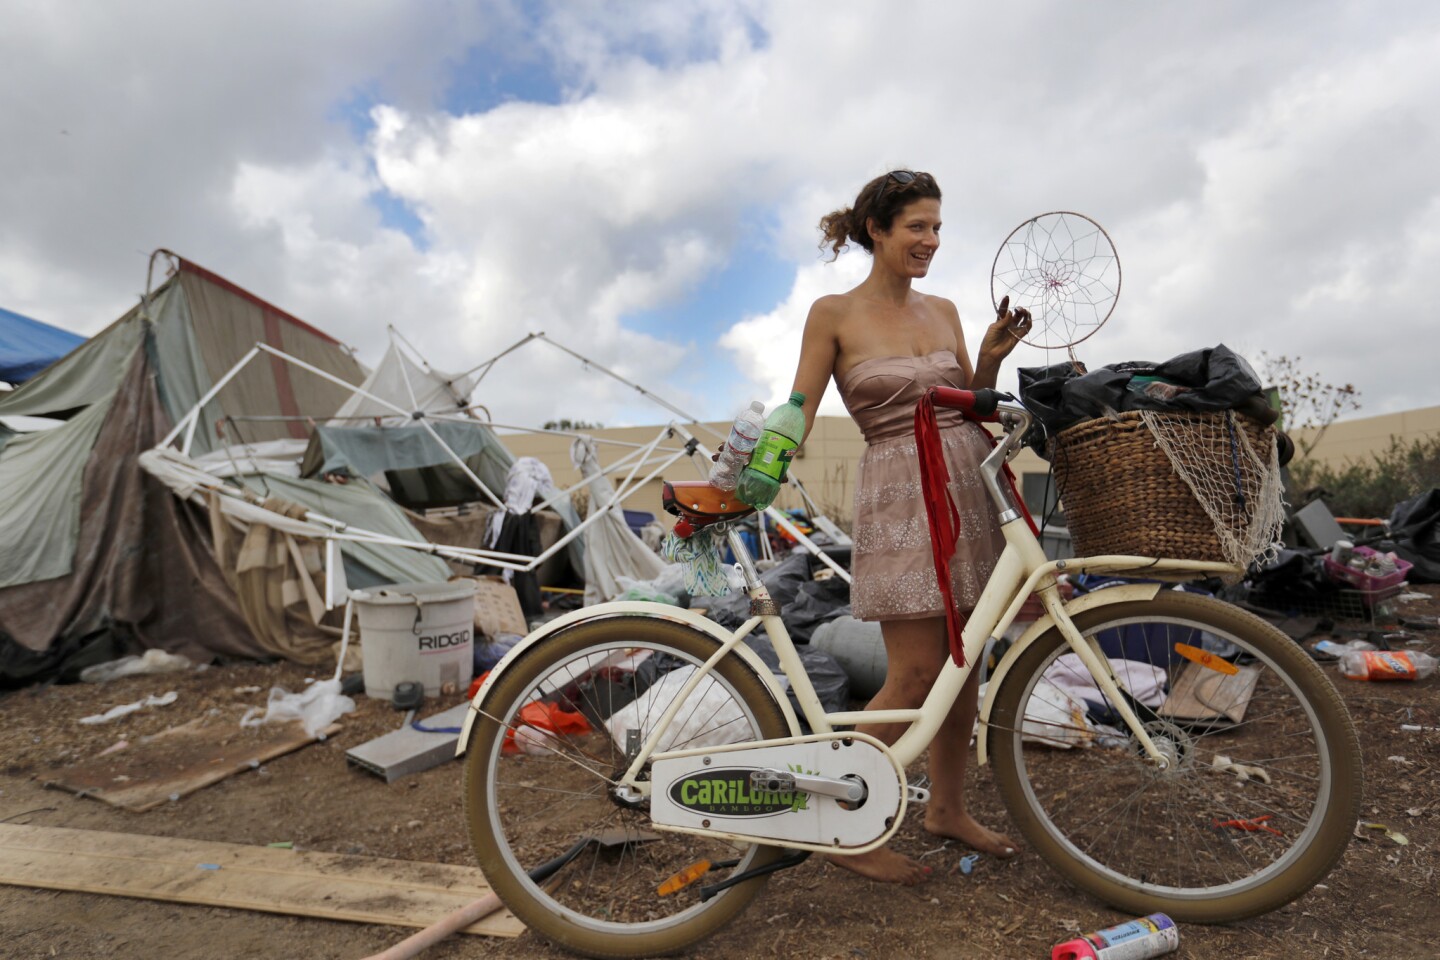 Morgan Gallerito wears a glamorous dress and holds a homemade dream catcher while being evicted with her belongings from a large homeless encampment along the Santa Ana River trail Friday.